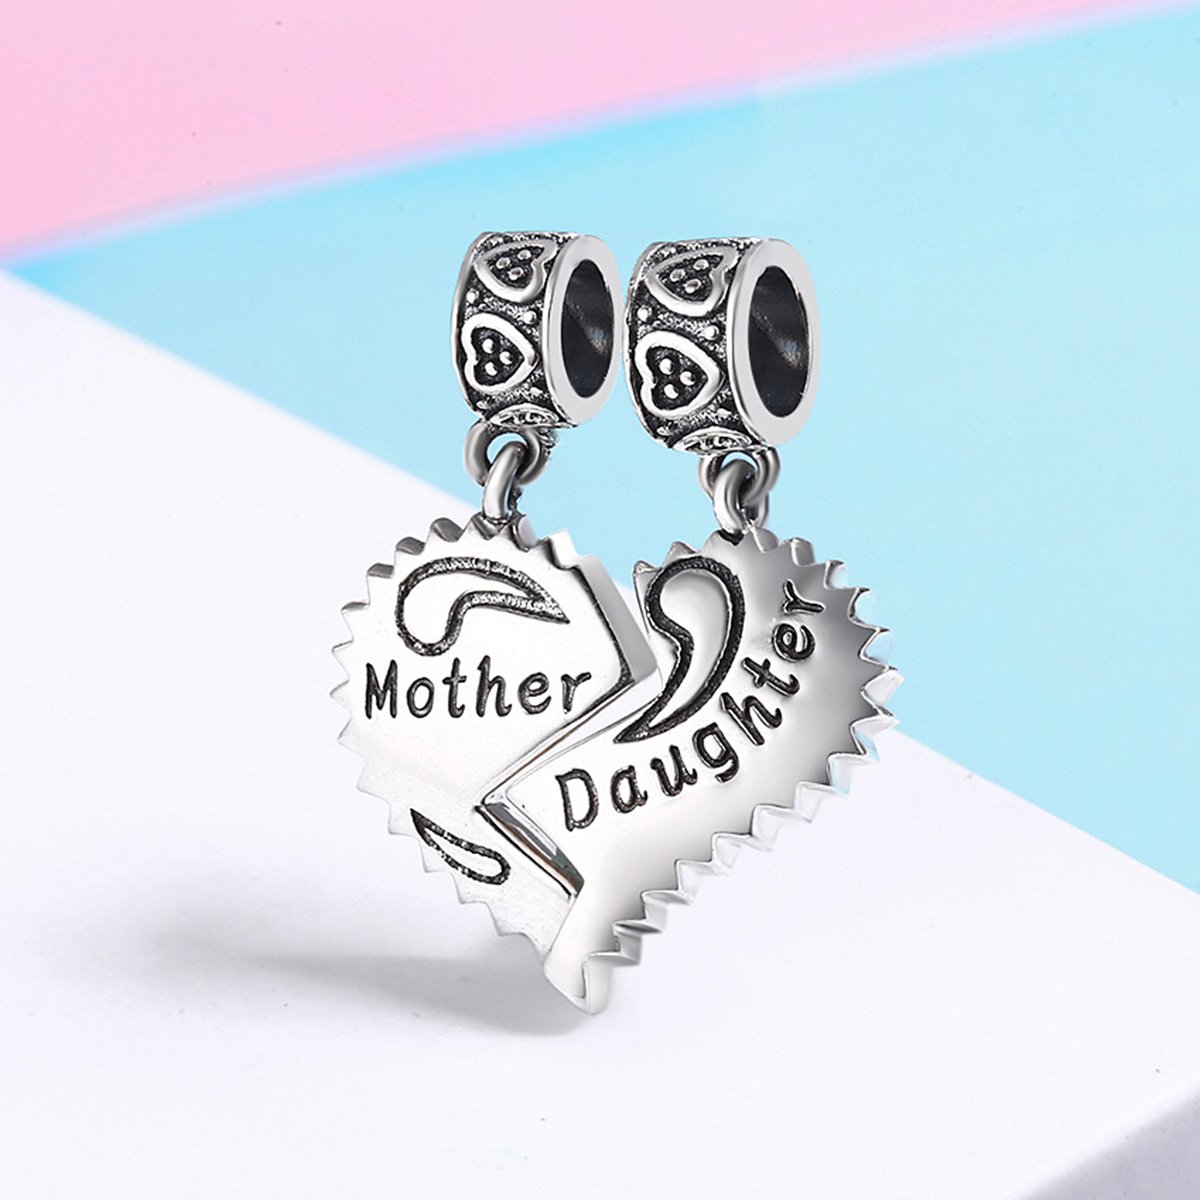 Mother And Daughter Love Forever 925 Sterling Silver Charm - Aisllin Jewelry